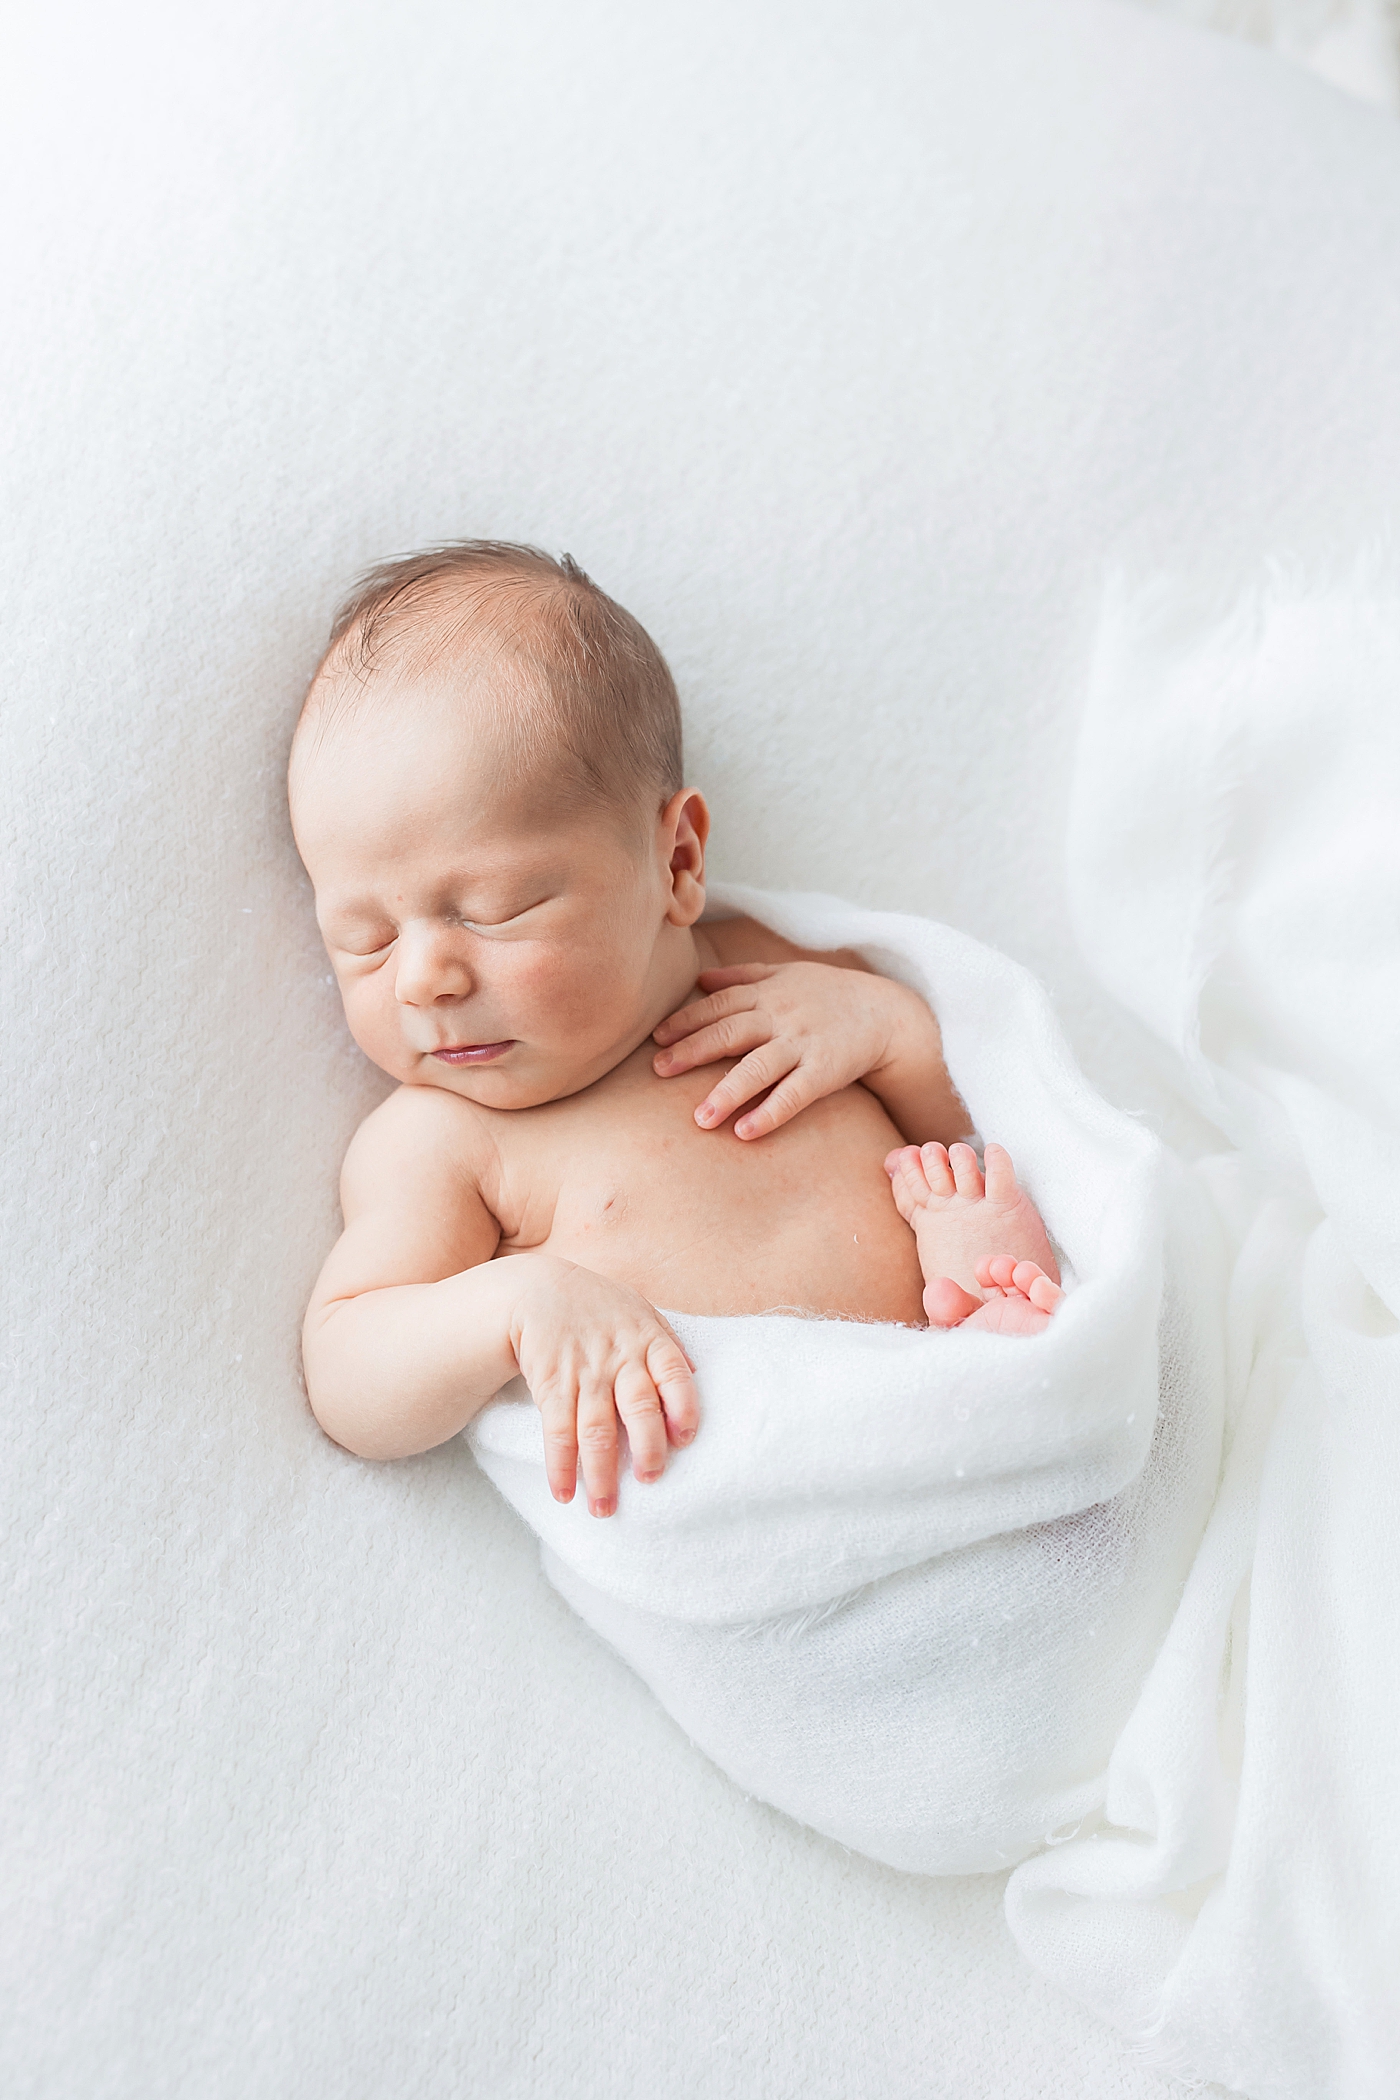 Baby boy curled up on his back and swaddled for newborn photos. Photos by Fresh Light Photography.